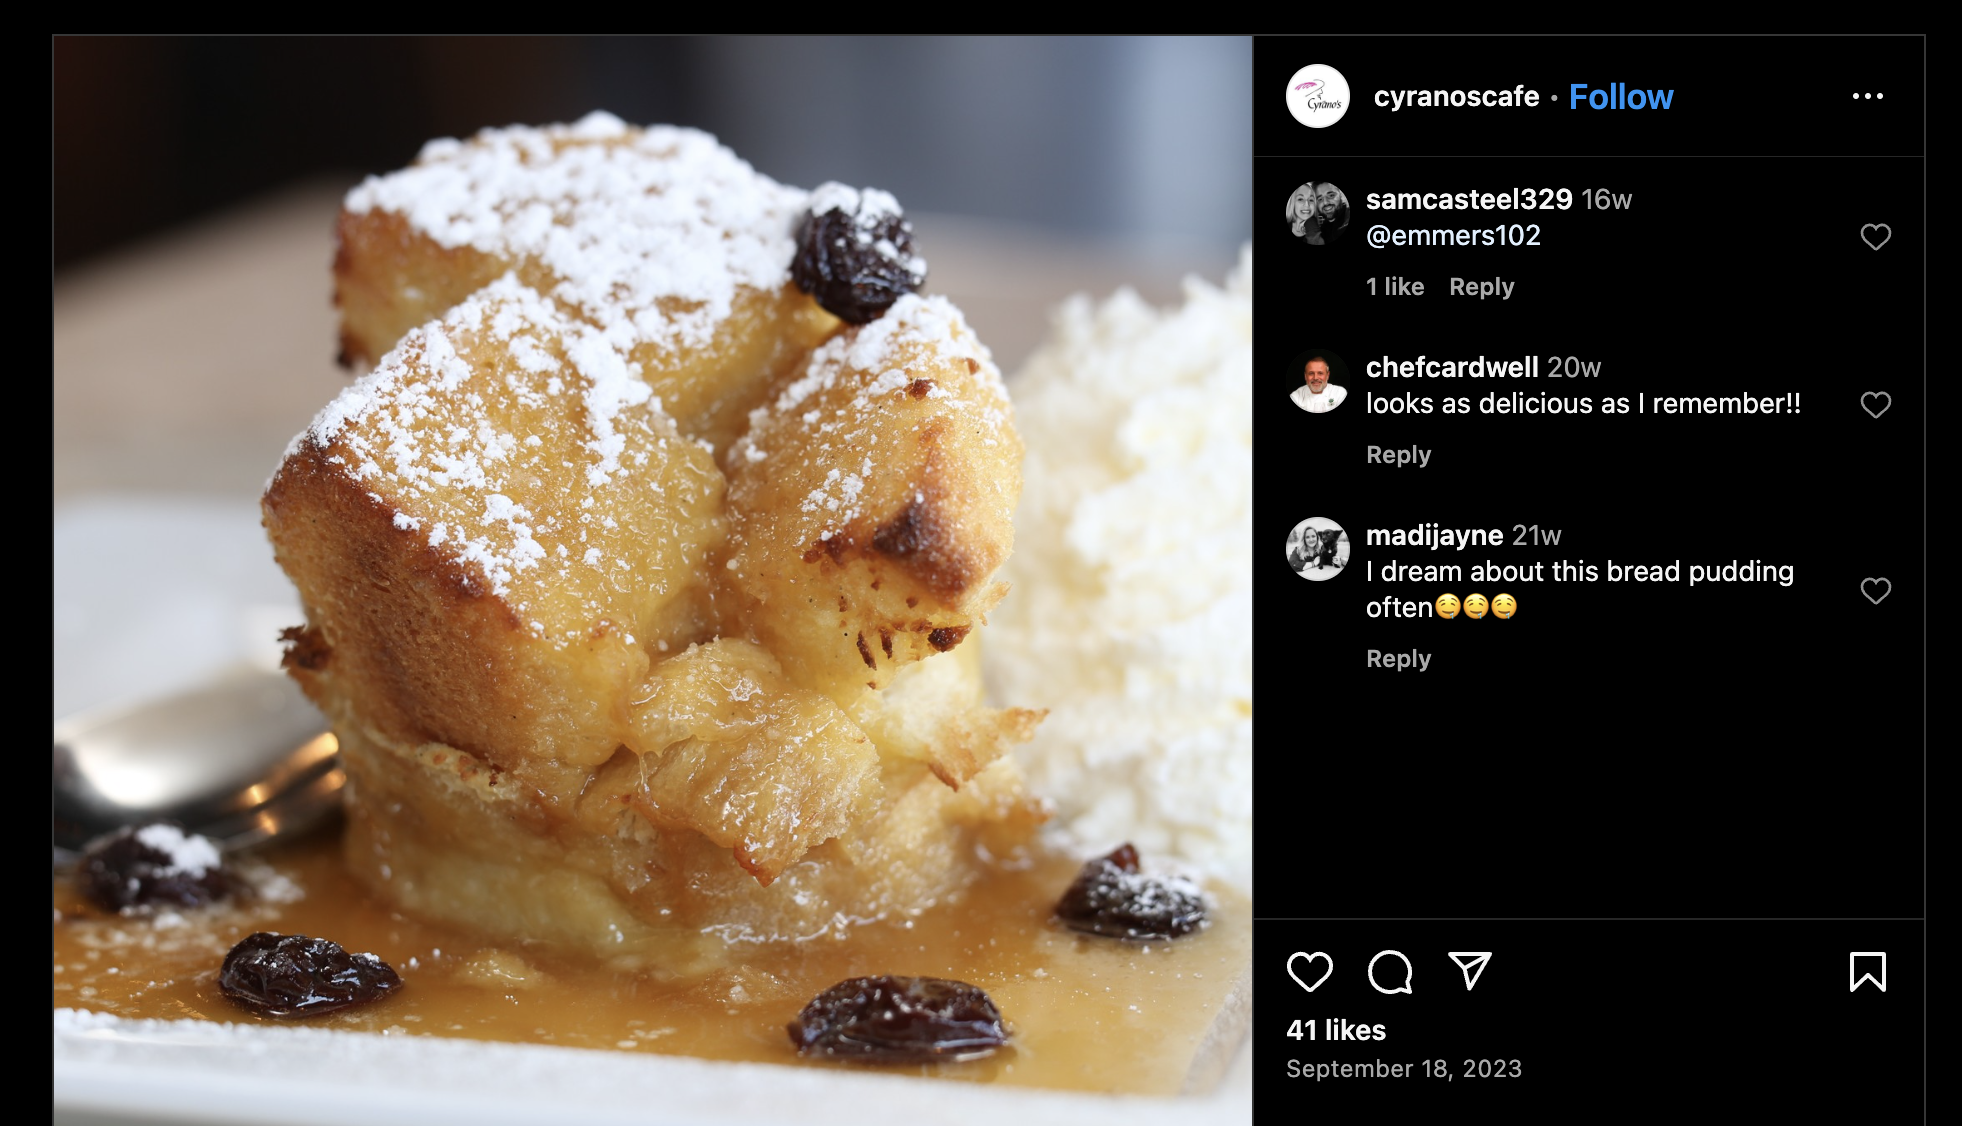 Delicious food dessert screenshot image from Cyrano's Cafe Instagram page in Saint Louis Missouri